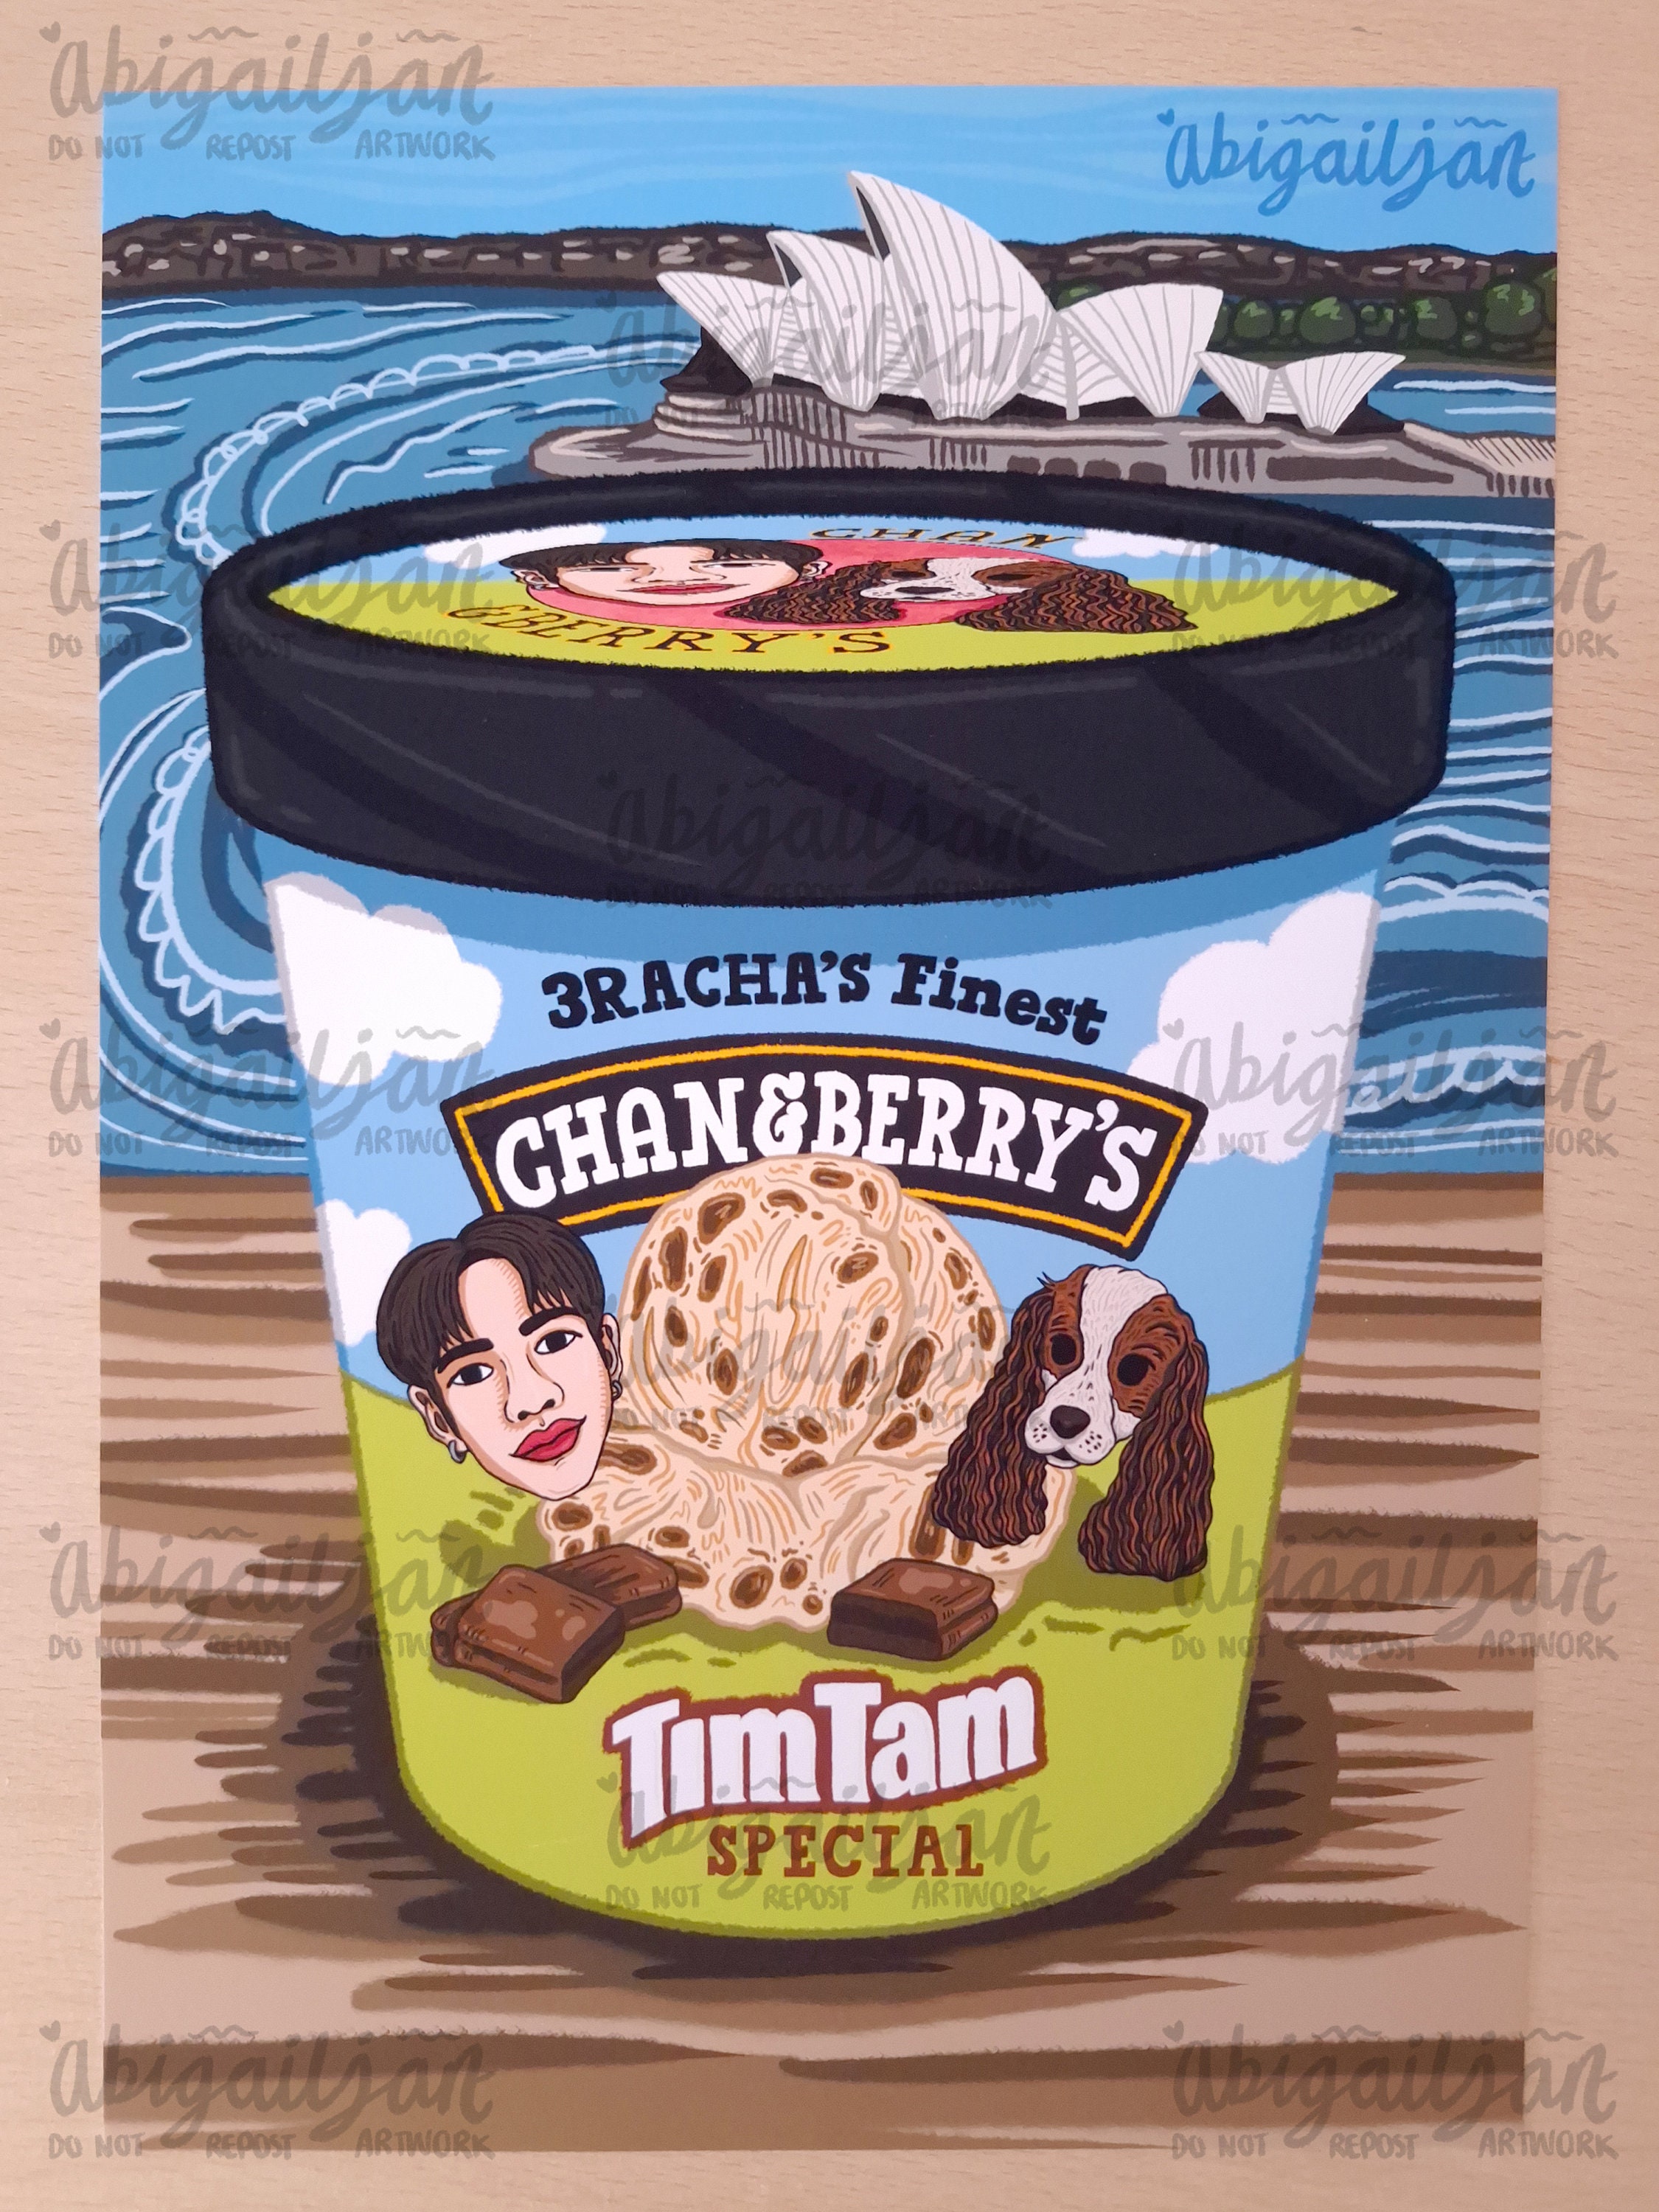 Pint Ice Cream Cozy, Ninja Creami, Ramen, Mac N Cheese, Bowl, Cup of Soup,  Assorted Variety, Ben and Jerry, Gelato, Cows, 